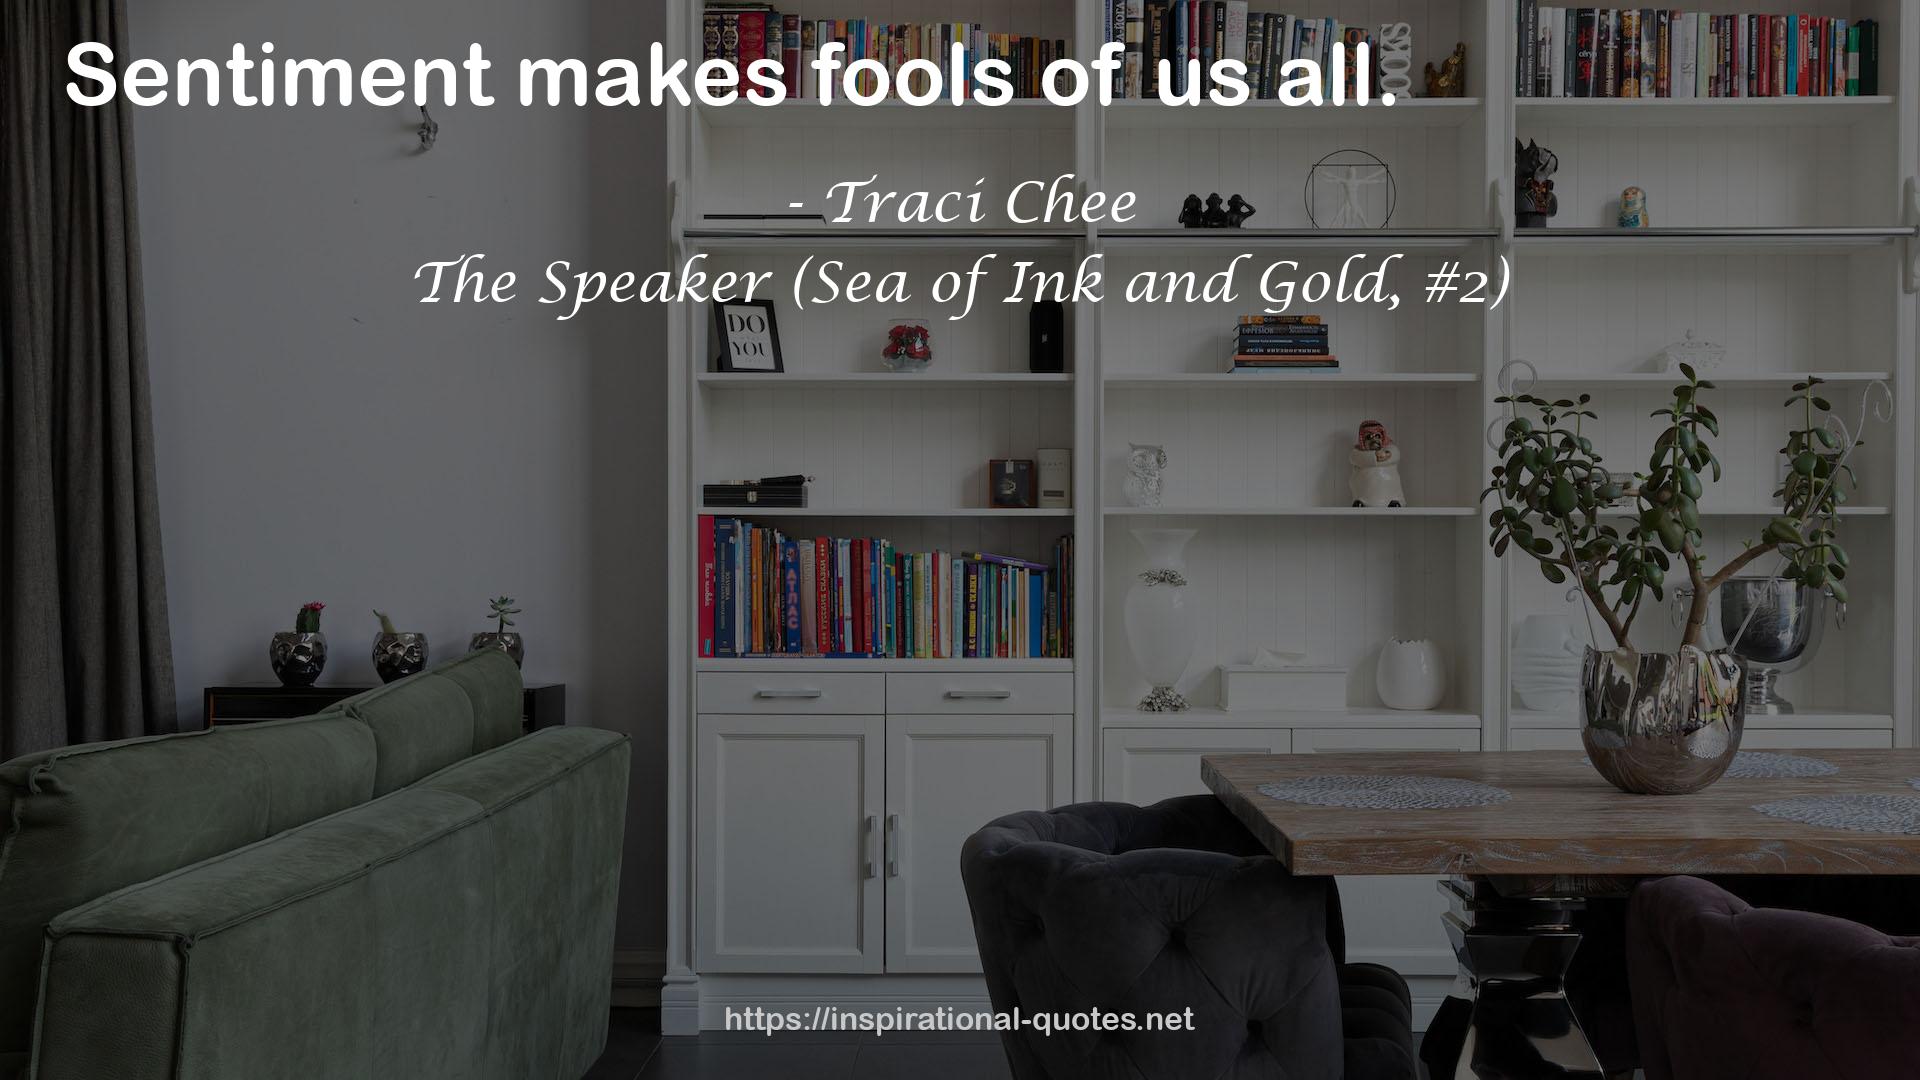 The Speaker (Sea of Ink and Gold, #2) QUOTES